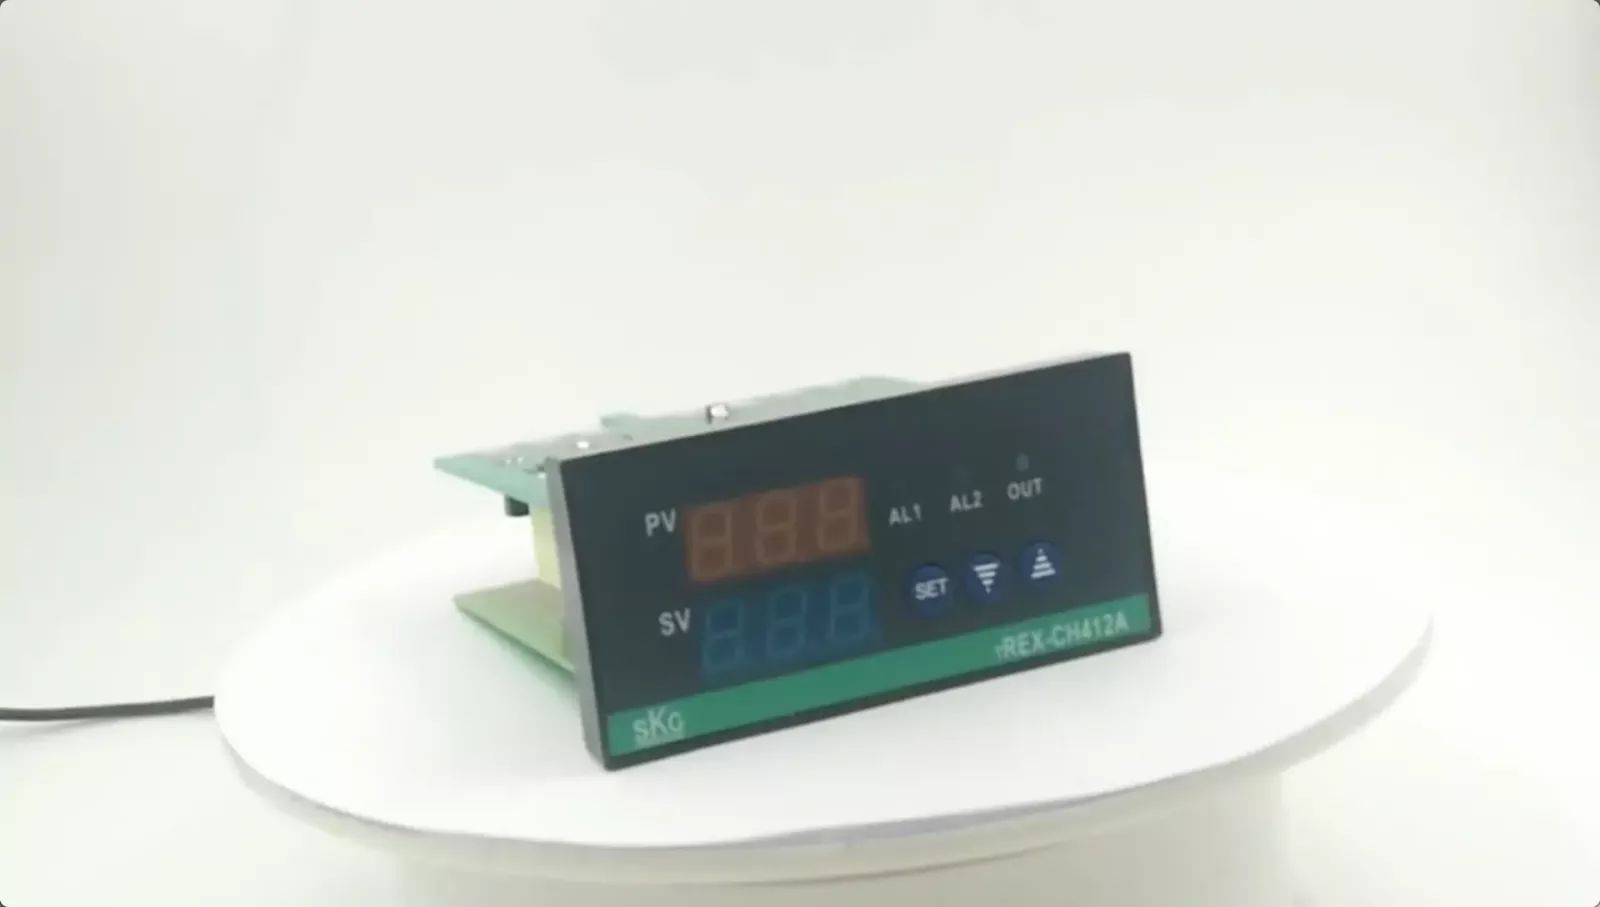 CH412A 3 digit digital aiset pid ssr temperature controller for Industrial commercial bread oven